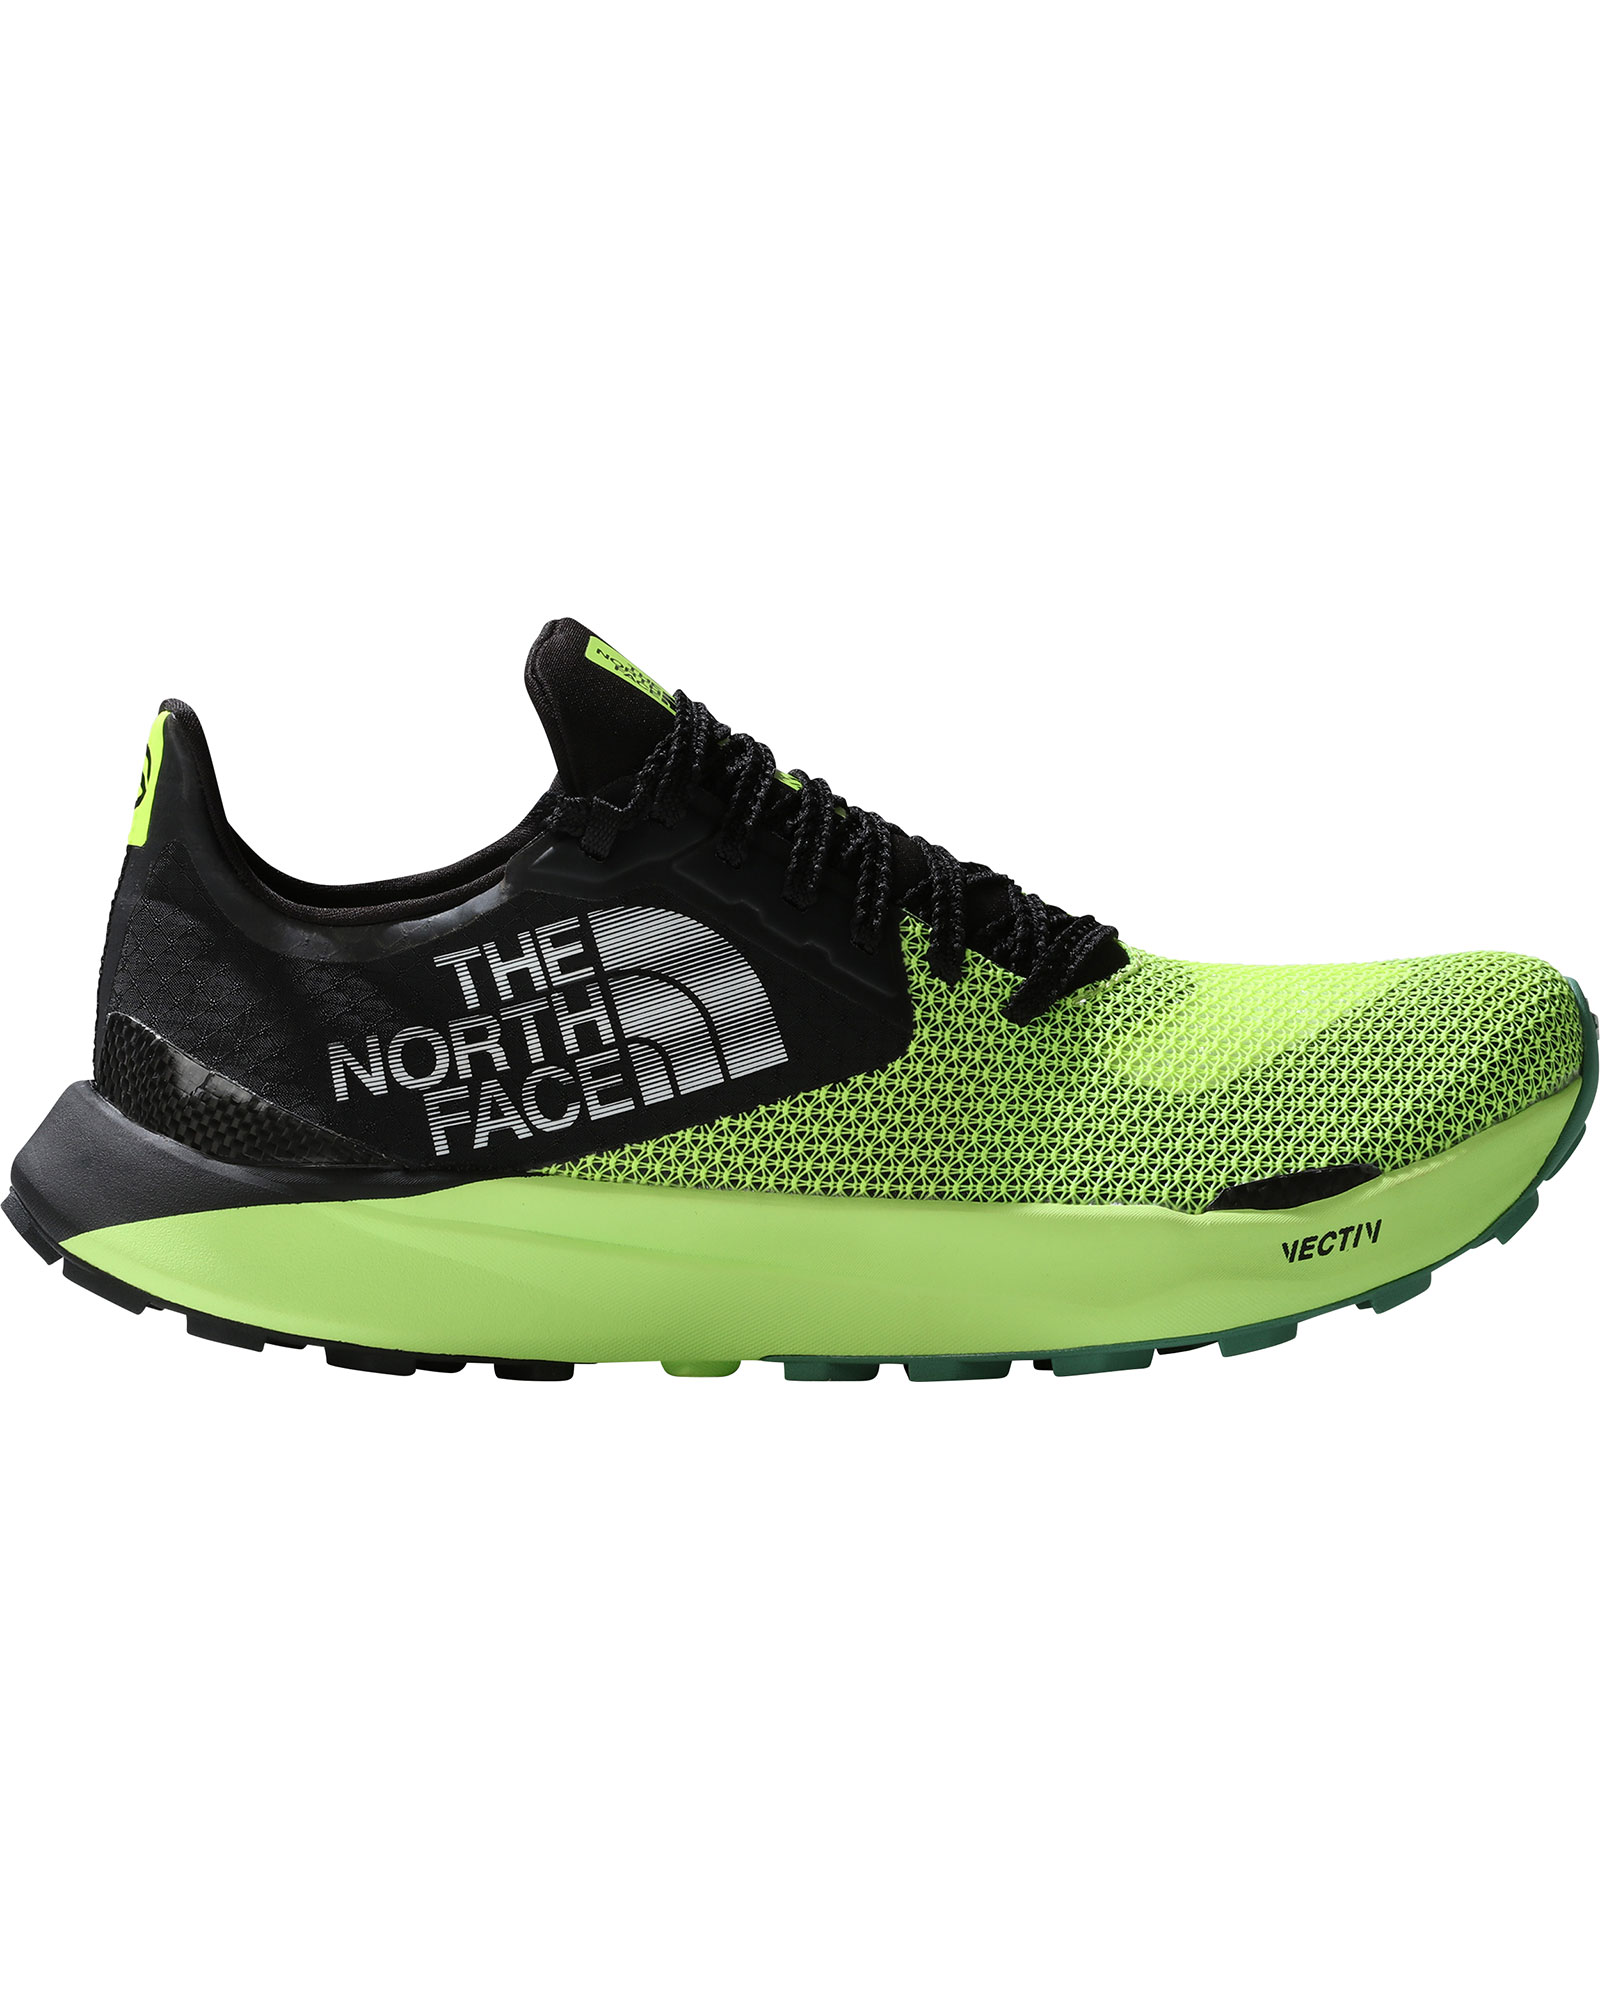 The North Face Summit Vectiv Sky Men’s Trail Shoes - LED Yellow/TNF Black UK 9